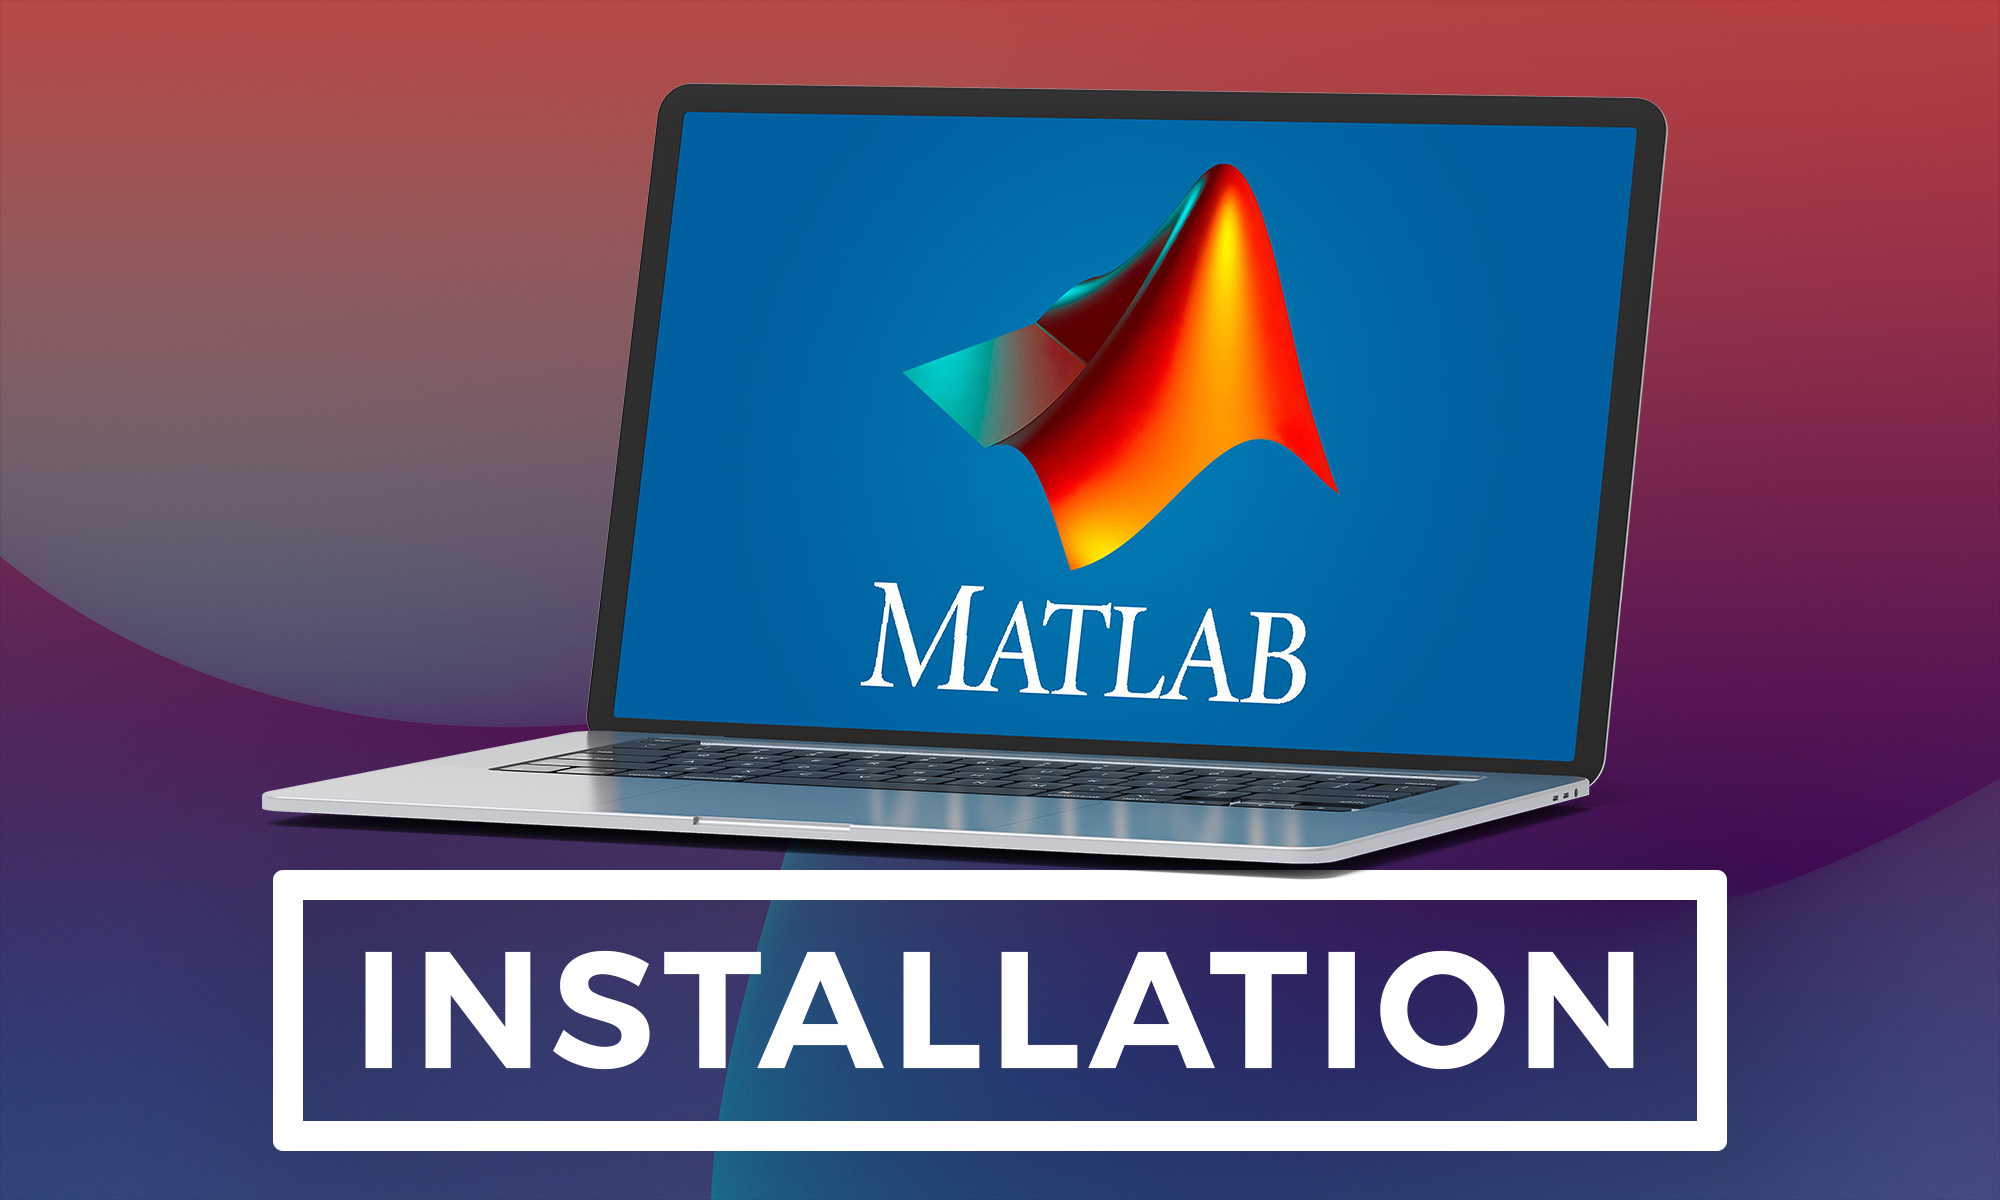 How to Install MATLAB